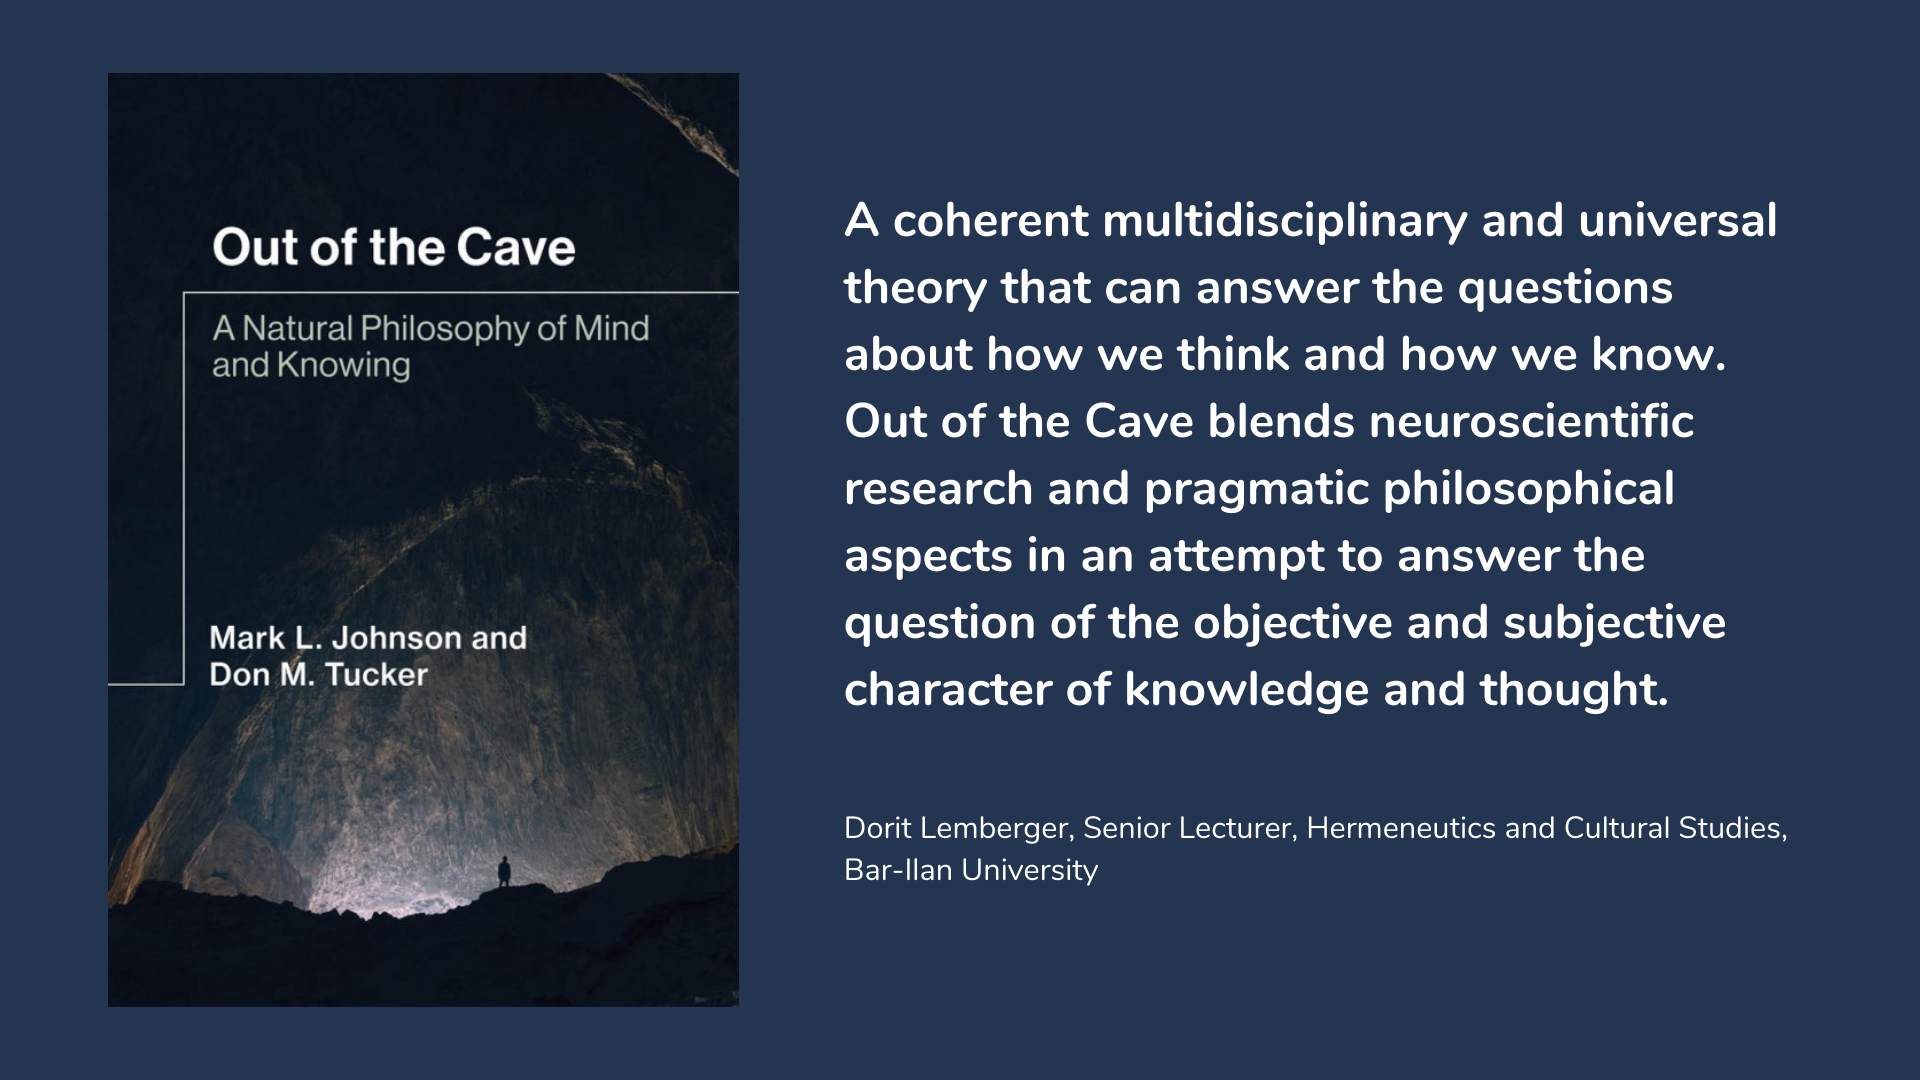 Out of the Cave: A Natural Philosophy of Mind and Knowing, book cover and description.